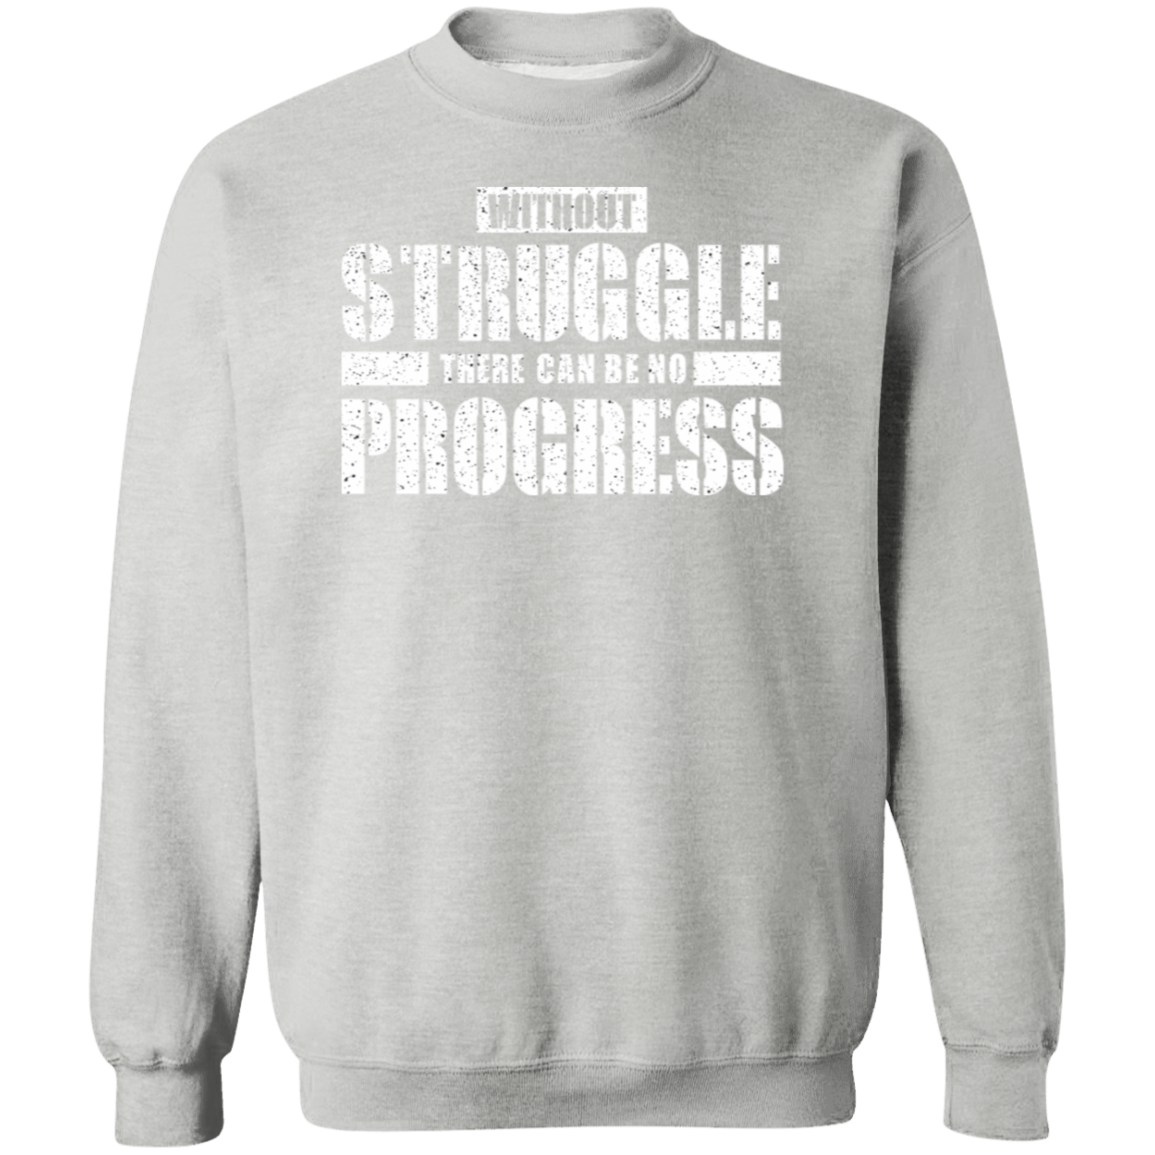 Without Struggle There can be no progress Premium Crew Neck Sweatshirt - Game Day Getup